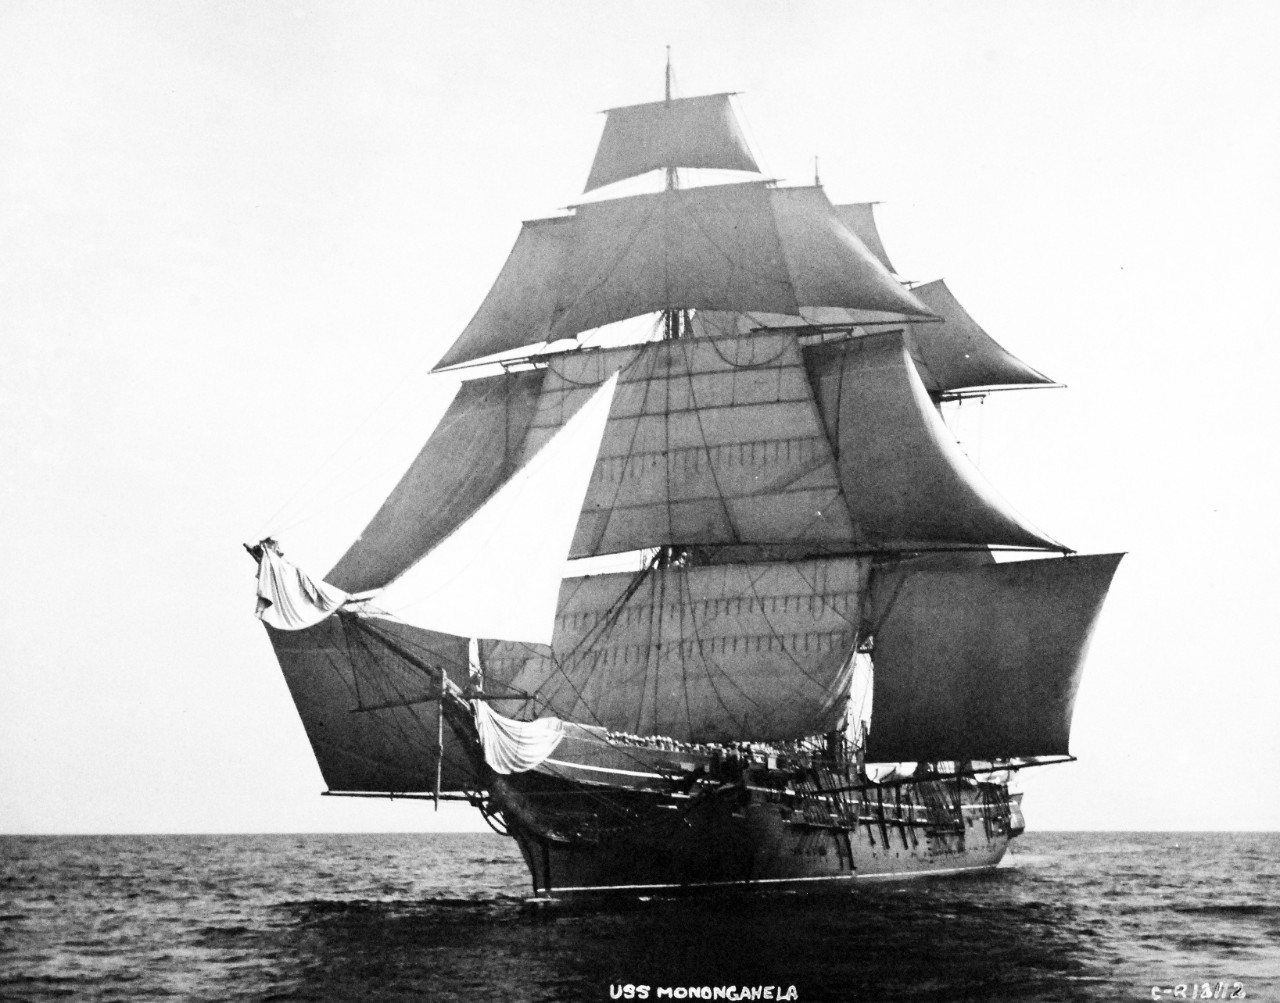 19-N-12112:   USS Monongahela later 1890s    Port view while under sail while serving as the U.S. Naval Academy Practice Ship.   Official U.S. Navy Photograph, now in the collections of the National Archives.   (2014/7/10).